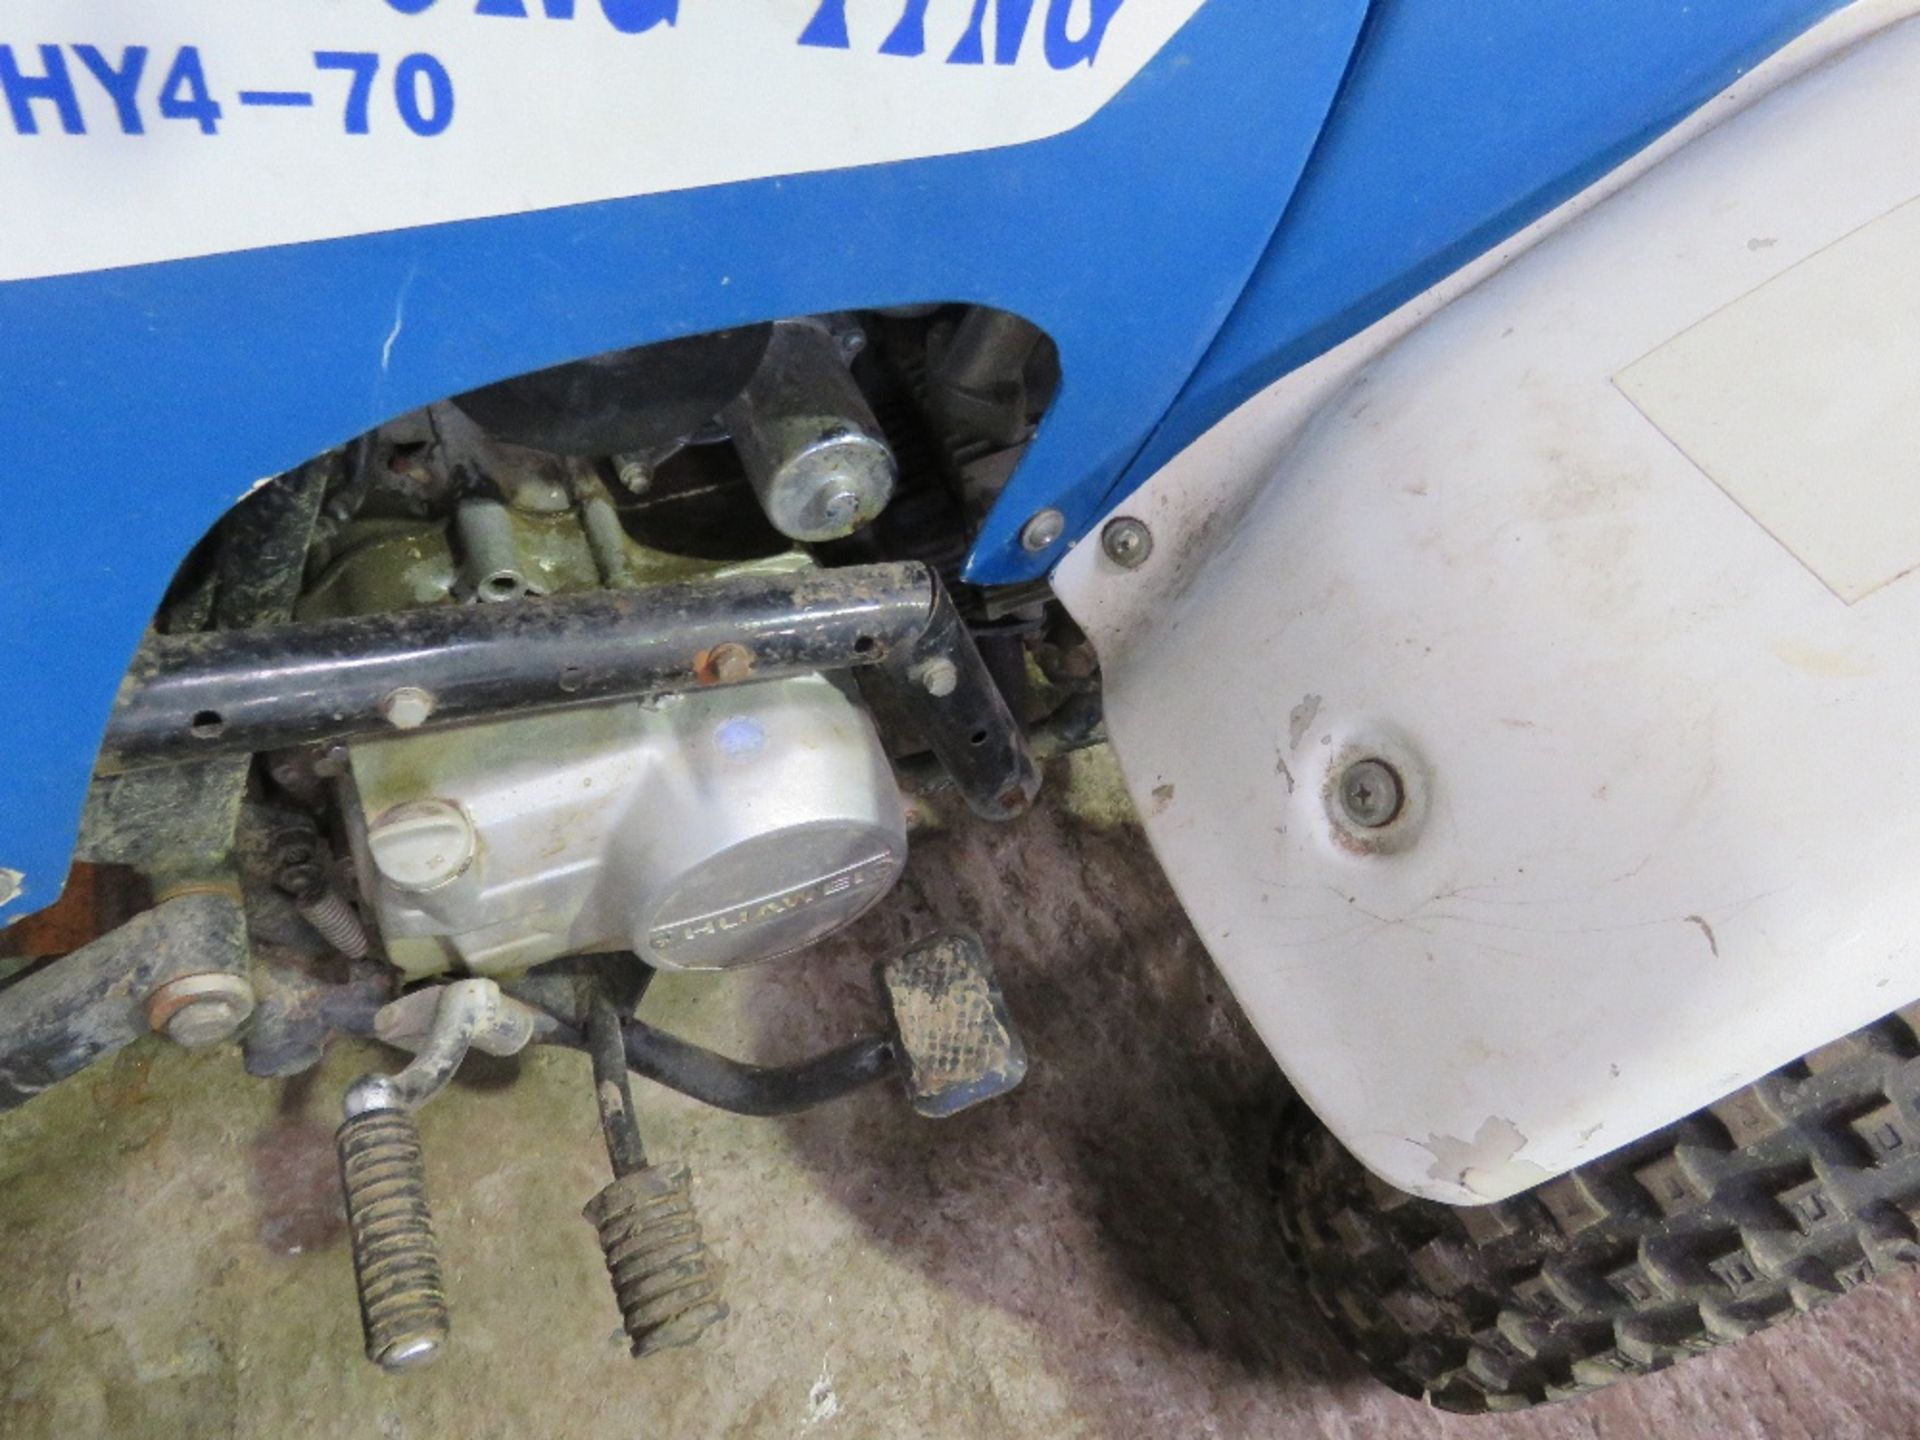 PETROL ENGINED 2WD QUAD BIKE, WHEN TESTED WAS SEEN TO RUN AND DRIVE..UNUSED FOR SOME TIME SO WOULD B - Image 5 of 8